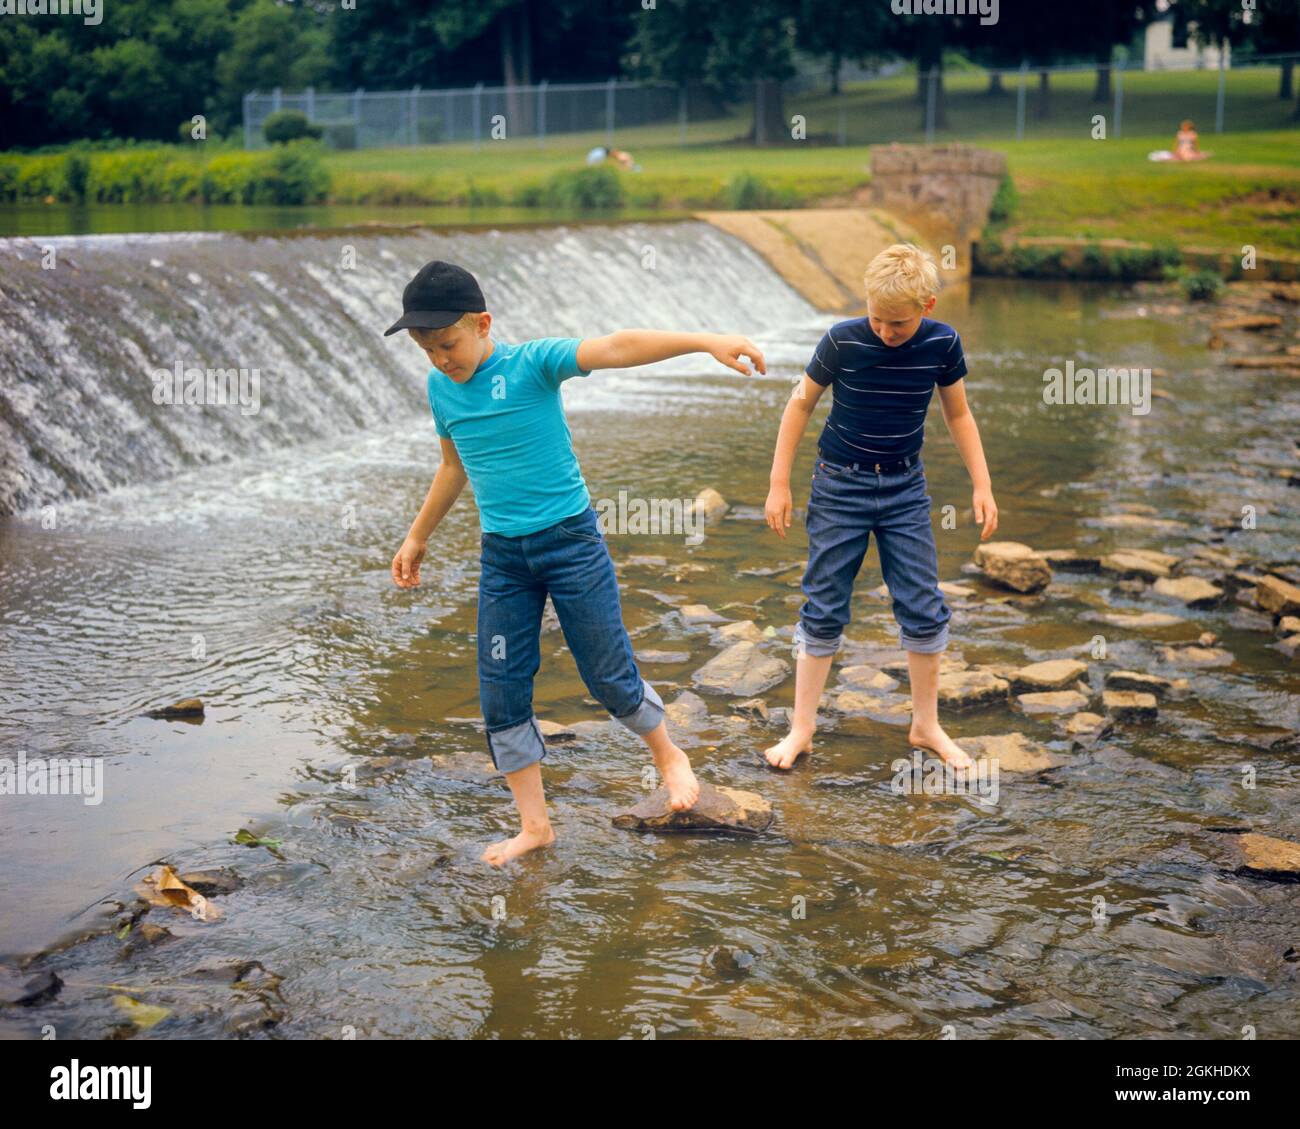 1970s TWO BOYS WADING BAREFOOT IN ROCKY STREAM JUST BELOW SPILLWAY OF A  SMALL WEIR - kj4445 HAR001 HARS JUST SIBLINGS CONFIDENCE DENIM SUMMERTIME  FREEDOM FRESH TEMPTATION ROCKY HAPPINESS ADVENTURE DISCOVERY WADING